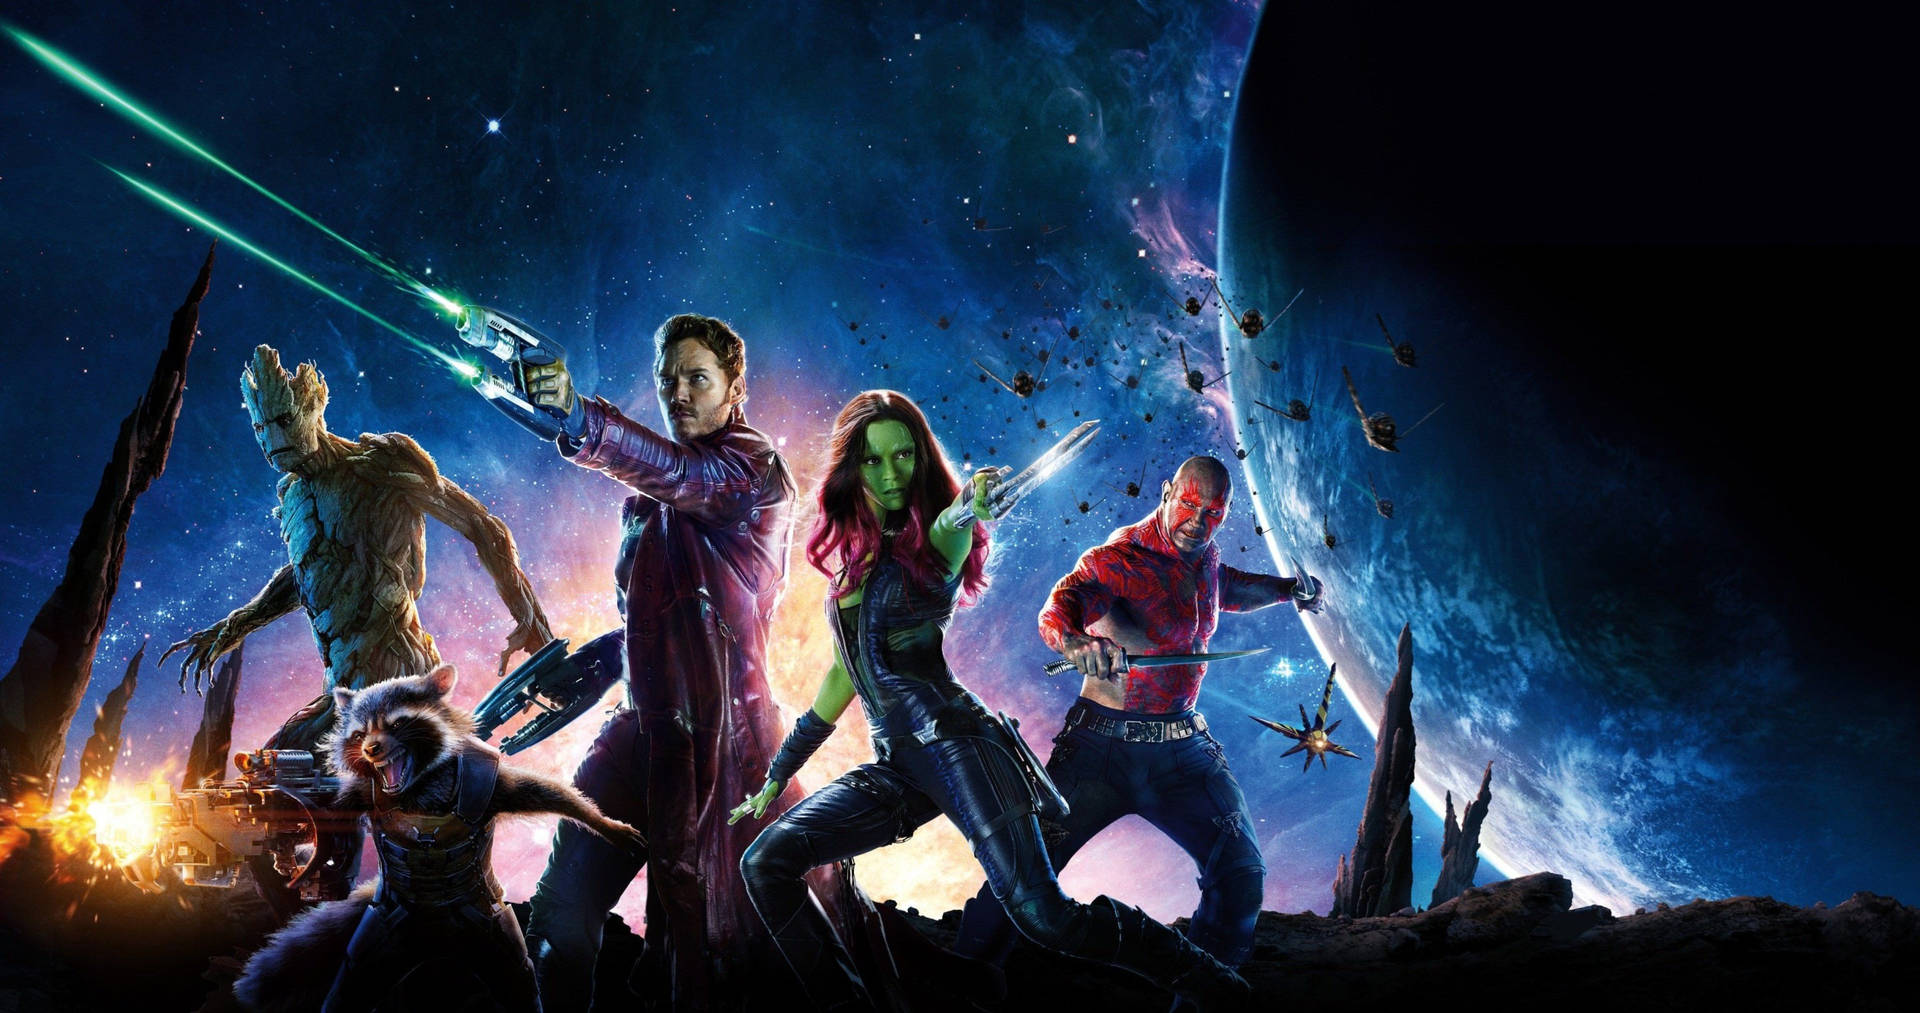 Marvel's Guardians of the Galaxy cast in all their glory. Wallpaper